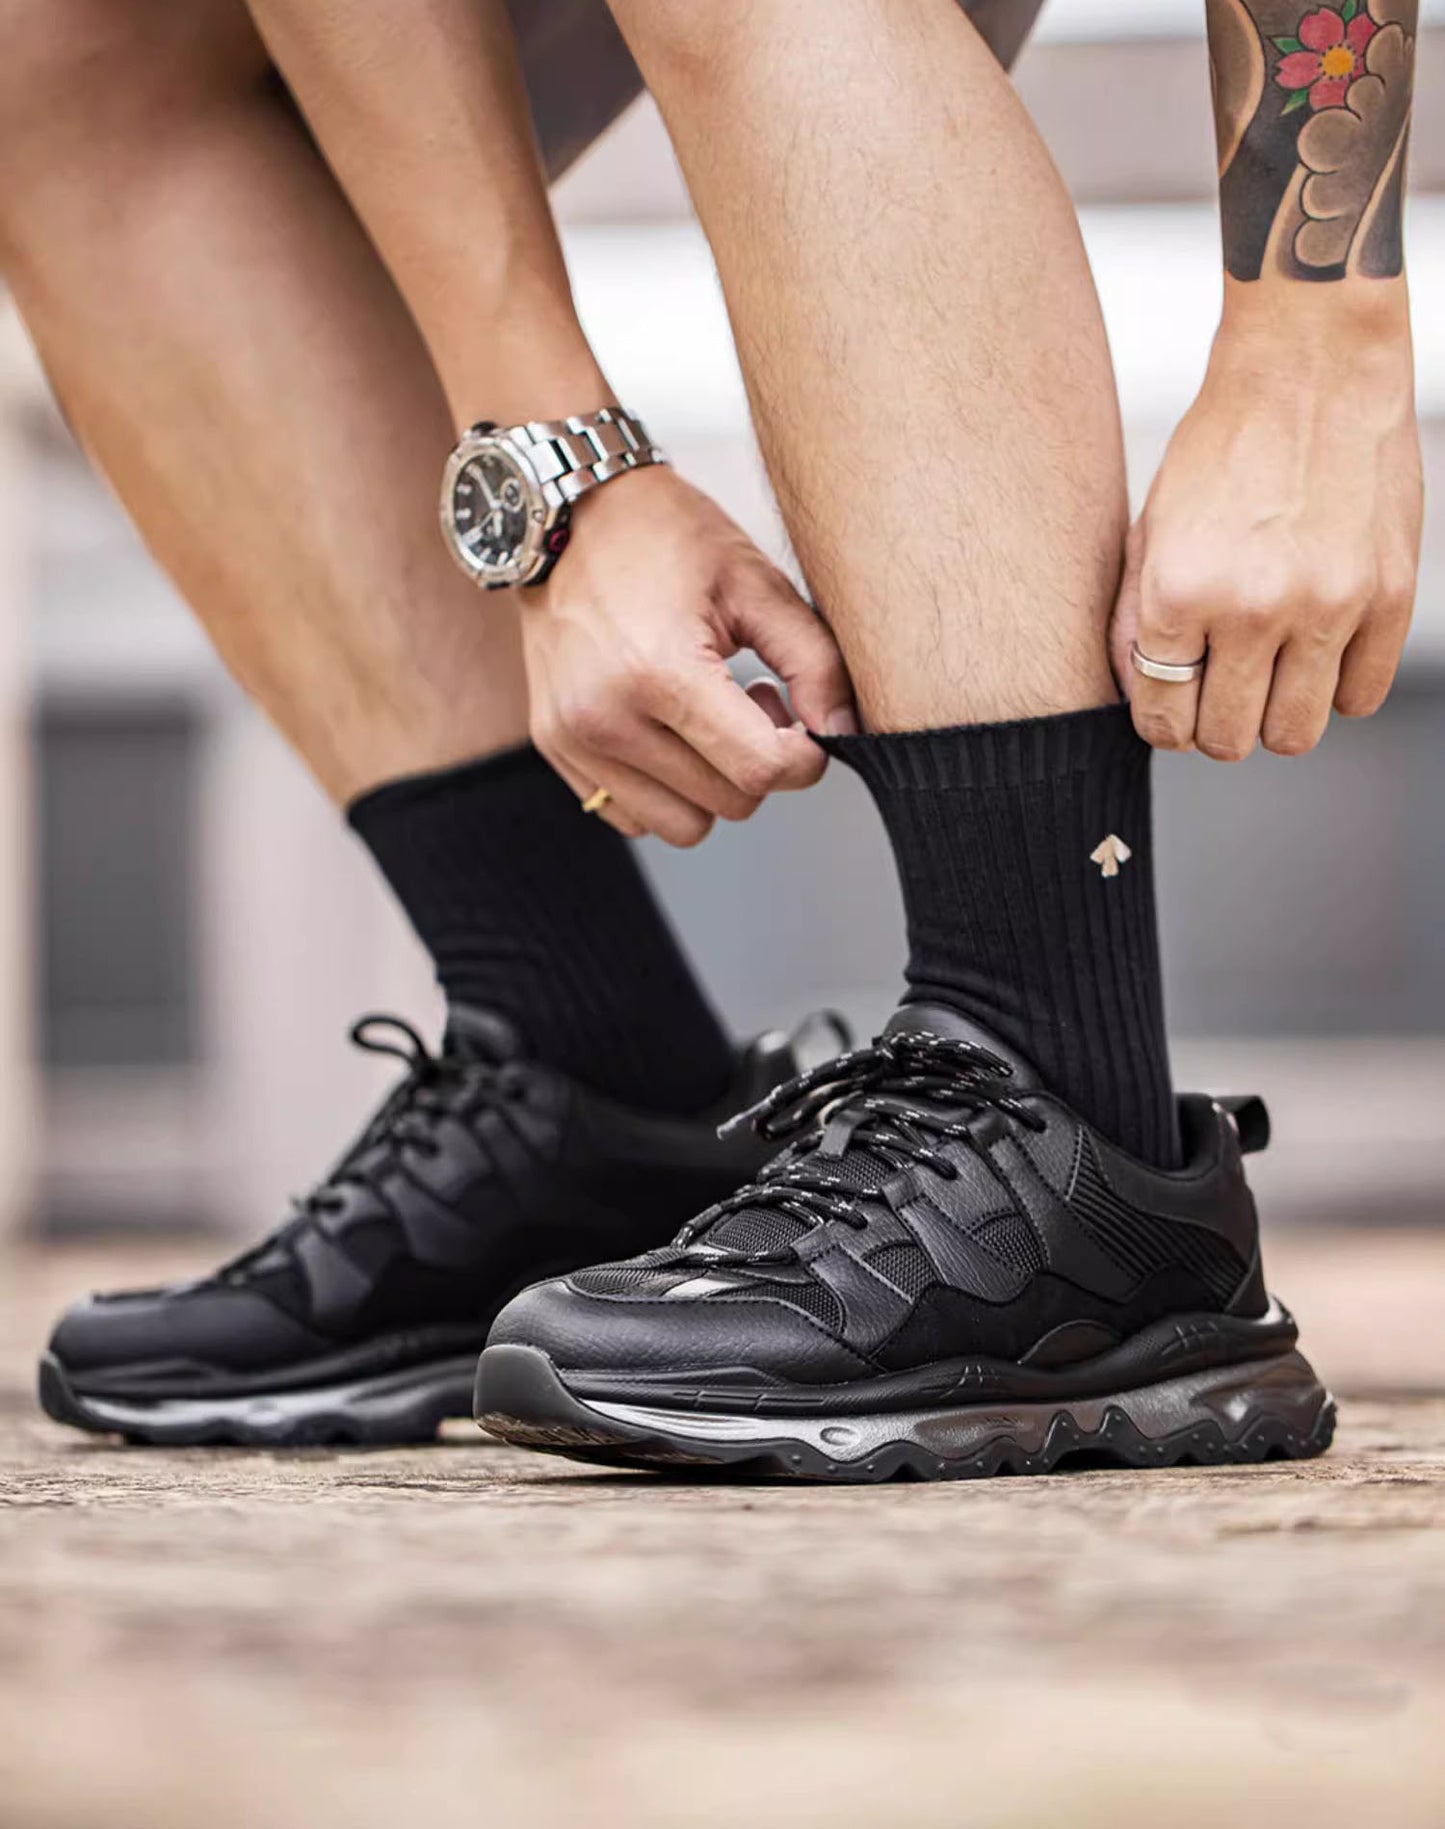 Jogging Black Warrior Thick-Soled Functional Men's Sports Shoes